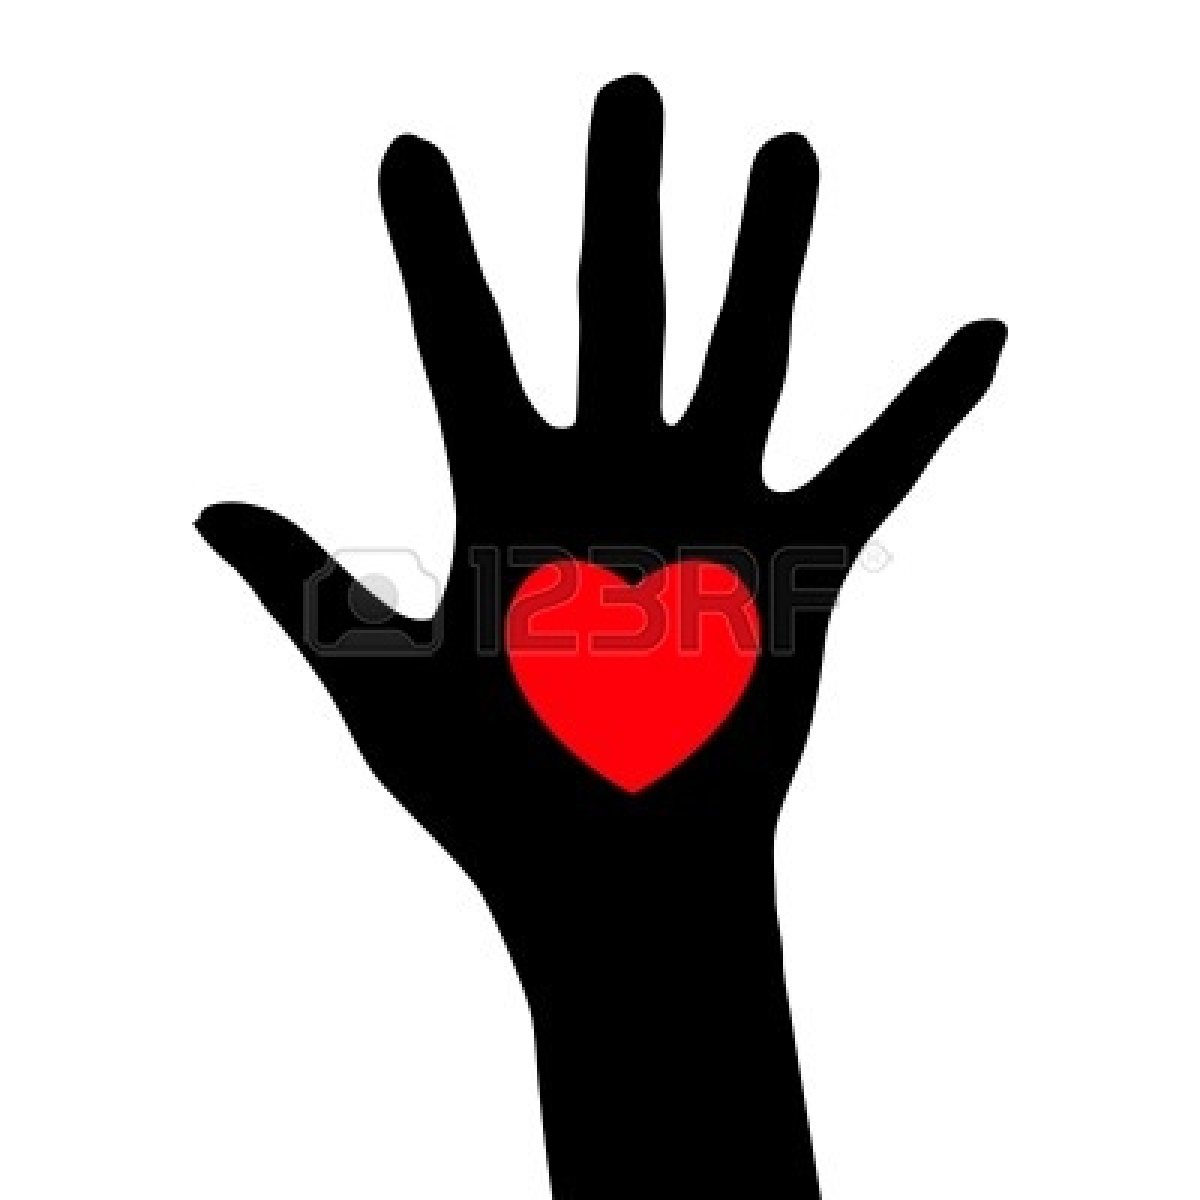 Helping Hand Clipart Black And White 9933600 Abstract Black Hand With